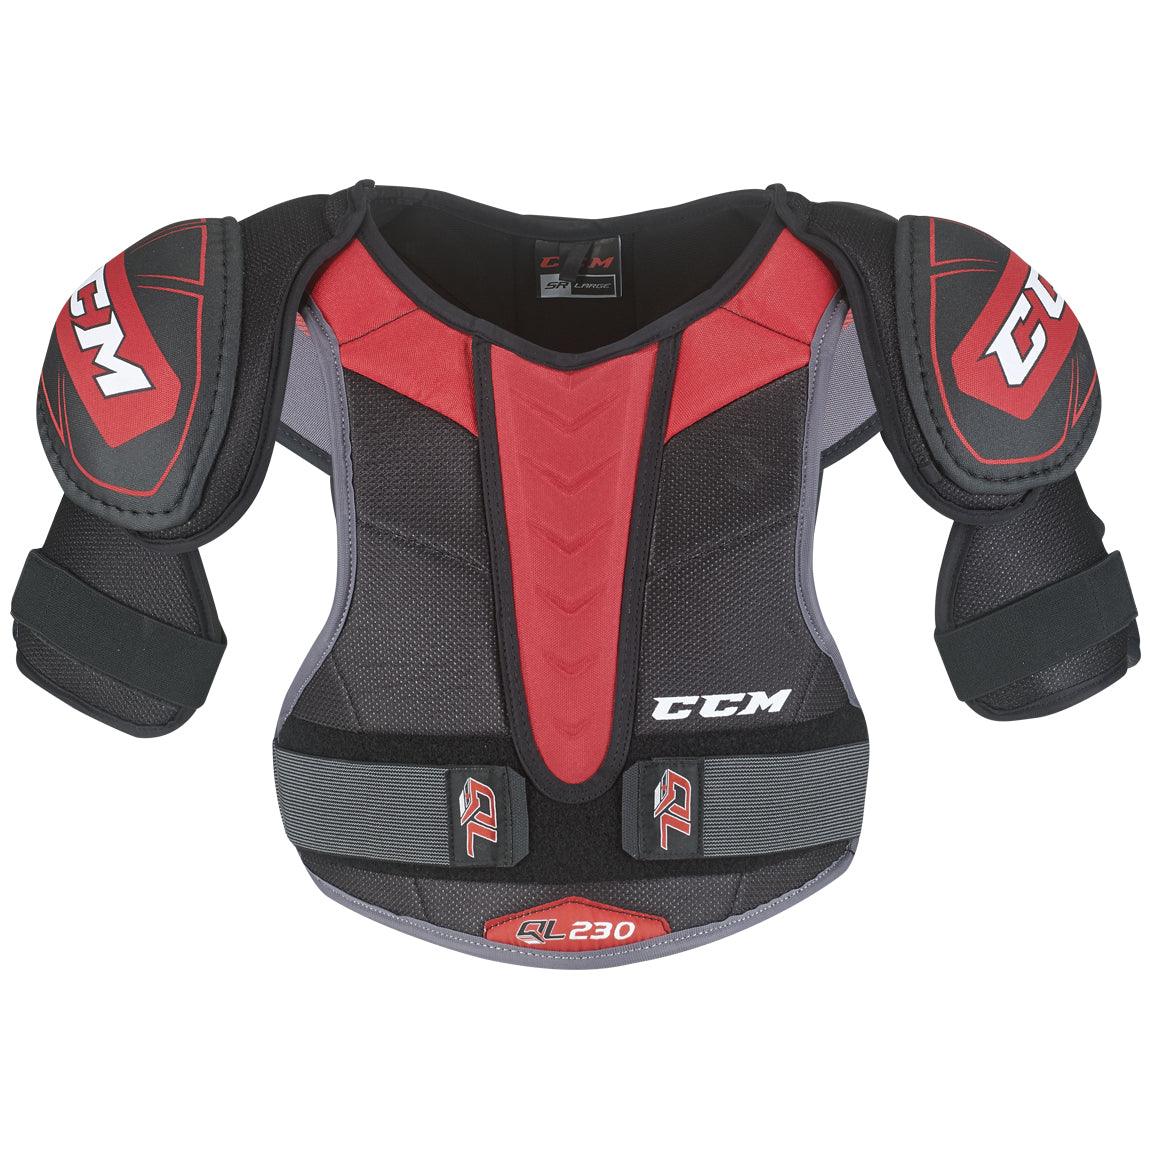 QLT 230 Shoulder Pads - Youth - Sports Excellence